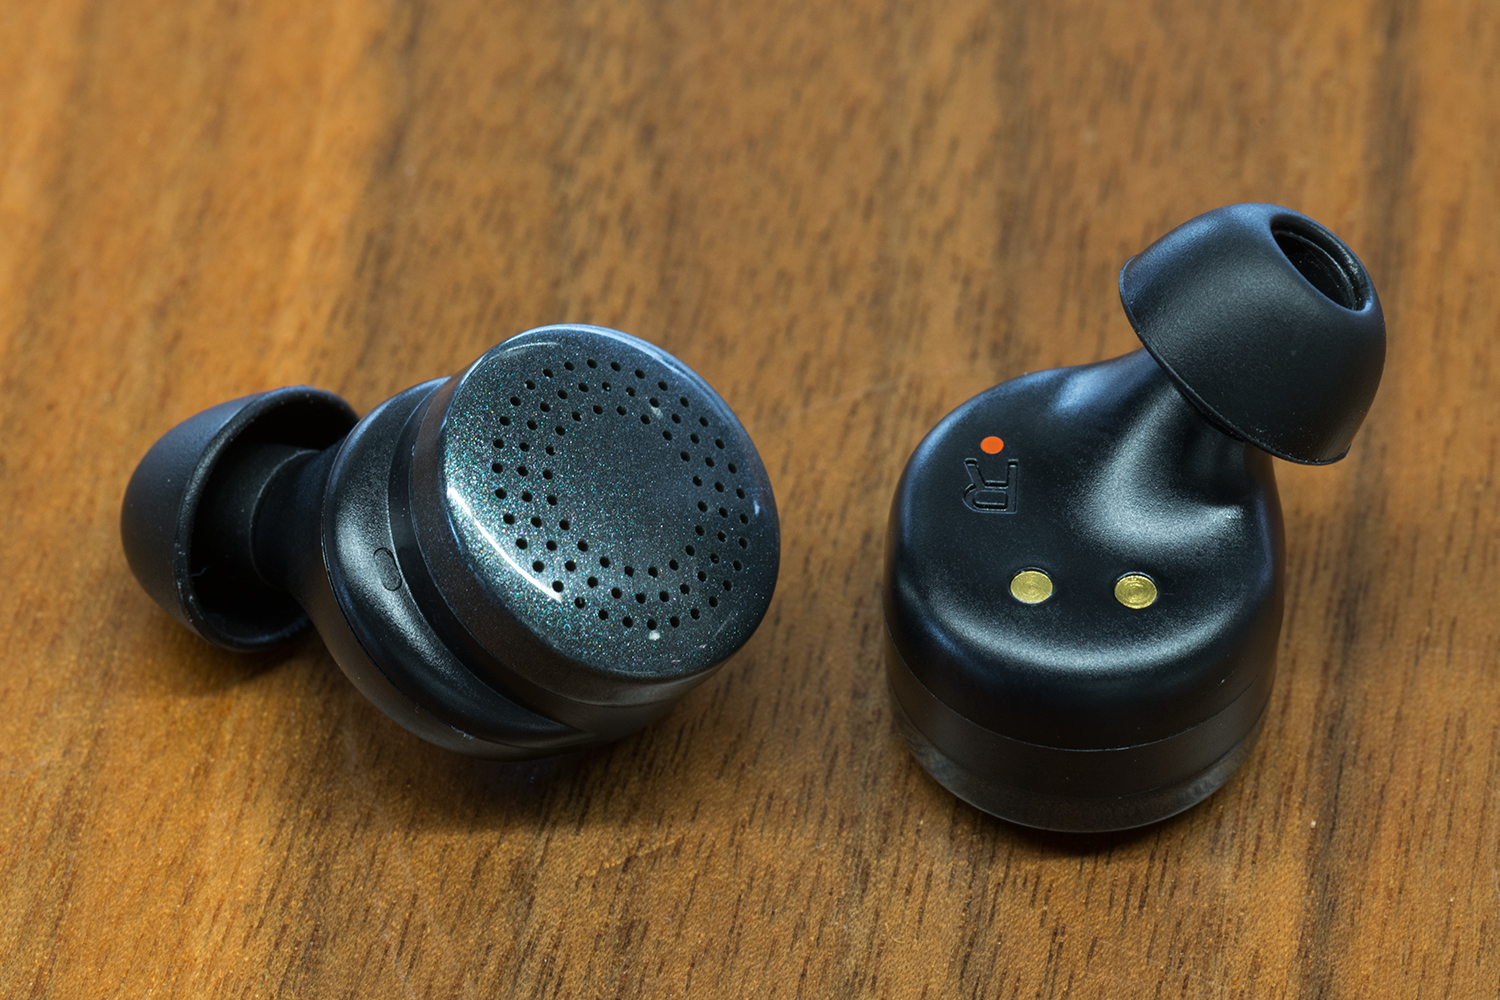 here active listening system hands on earbuds maincu v2